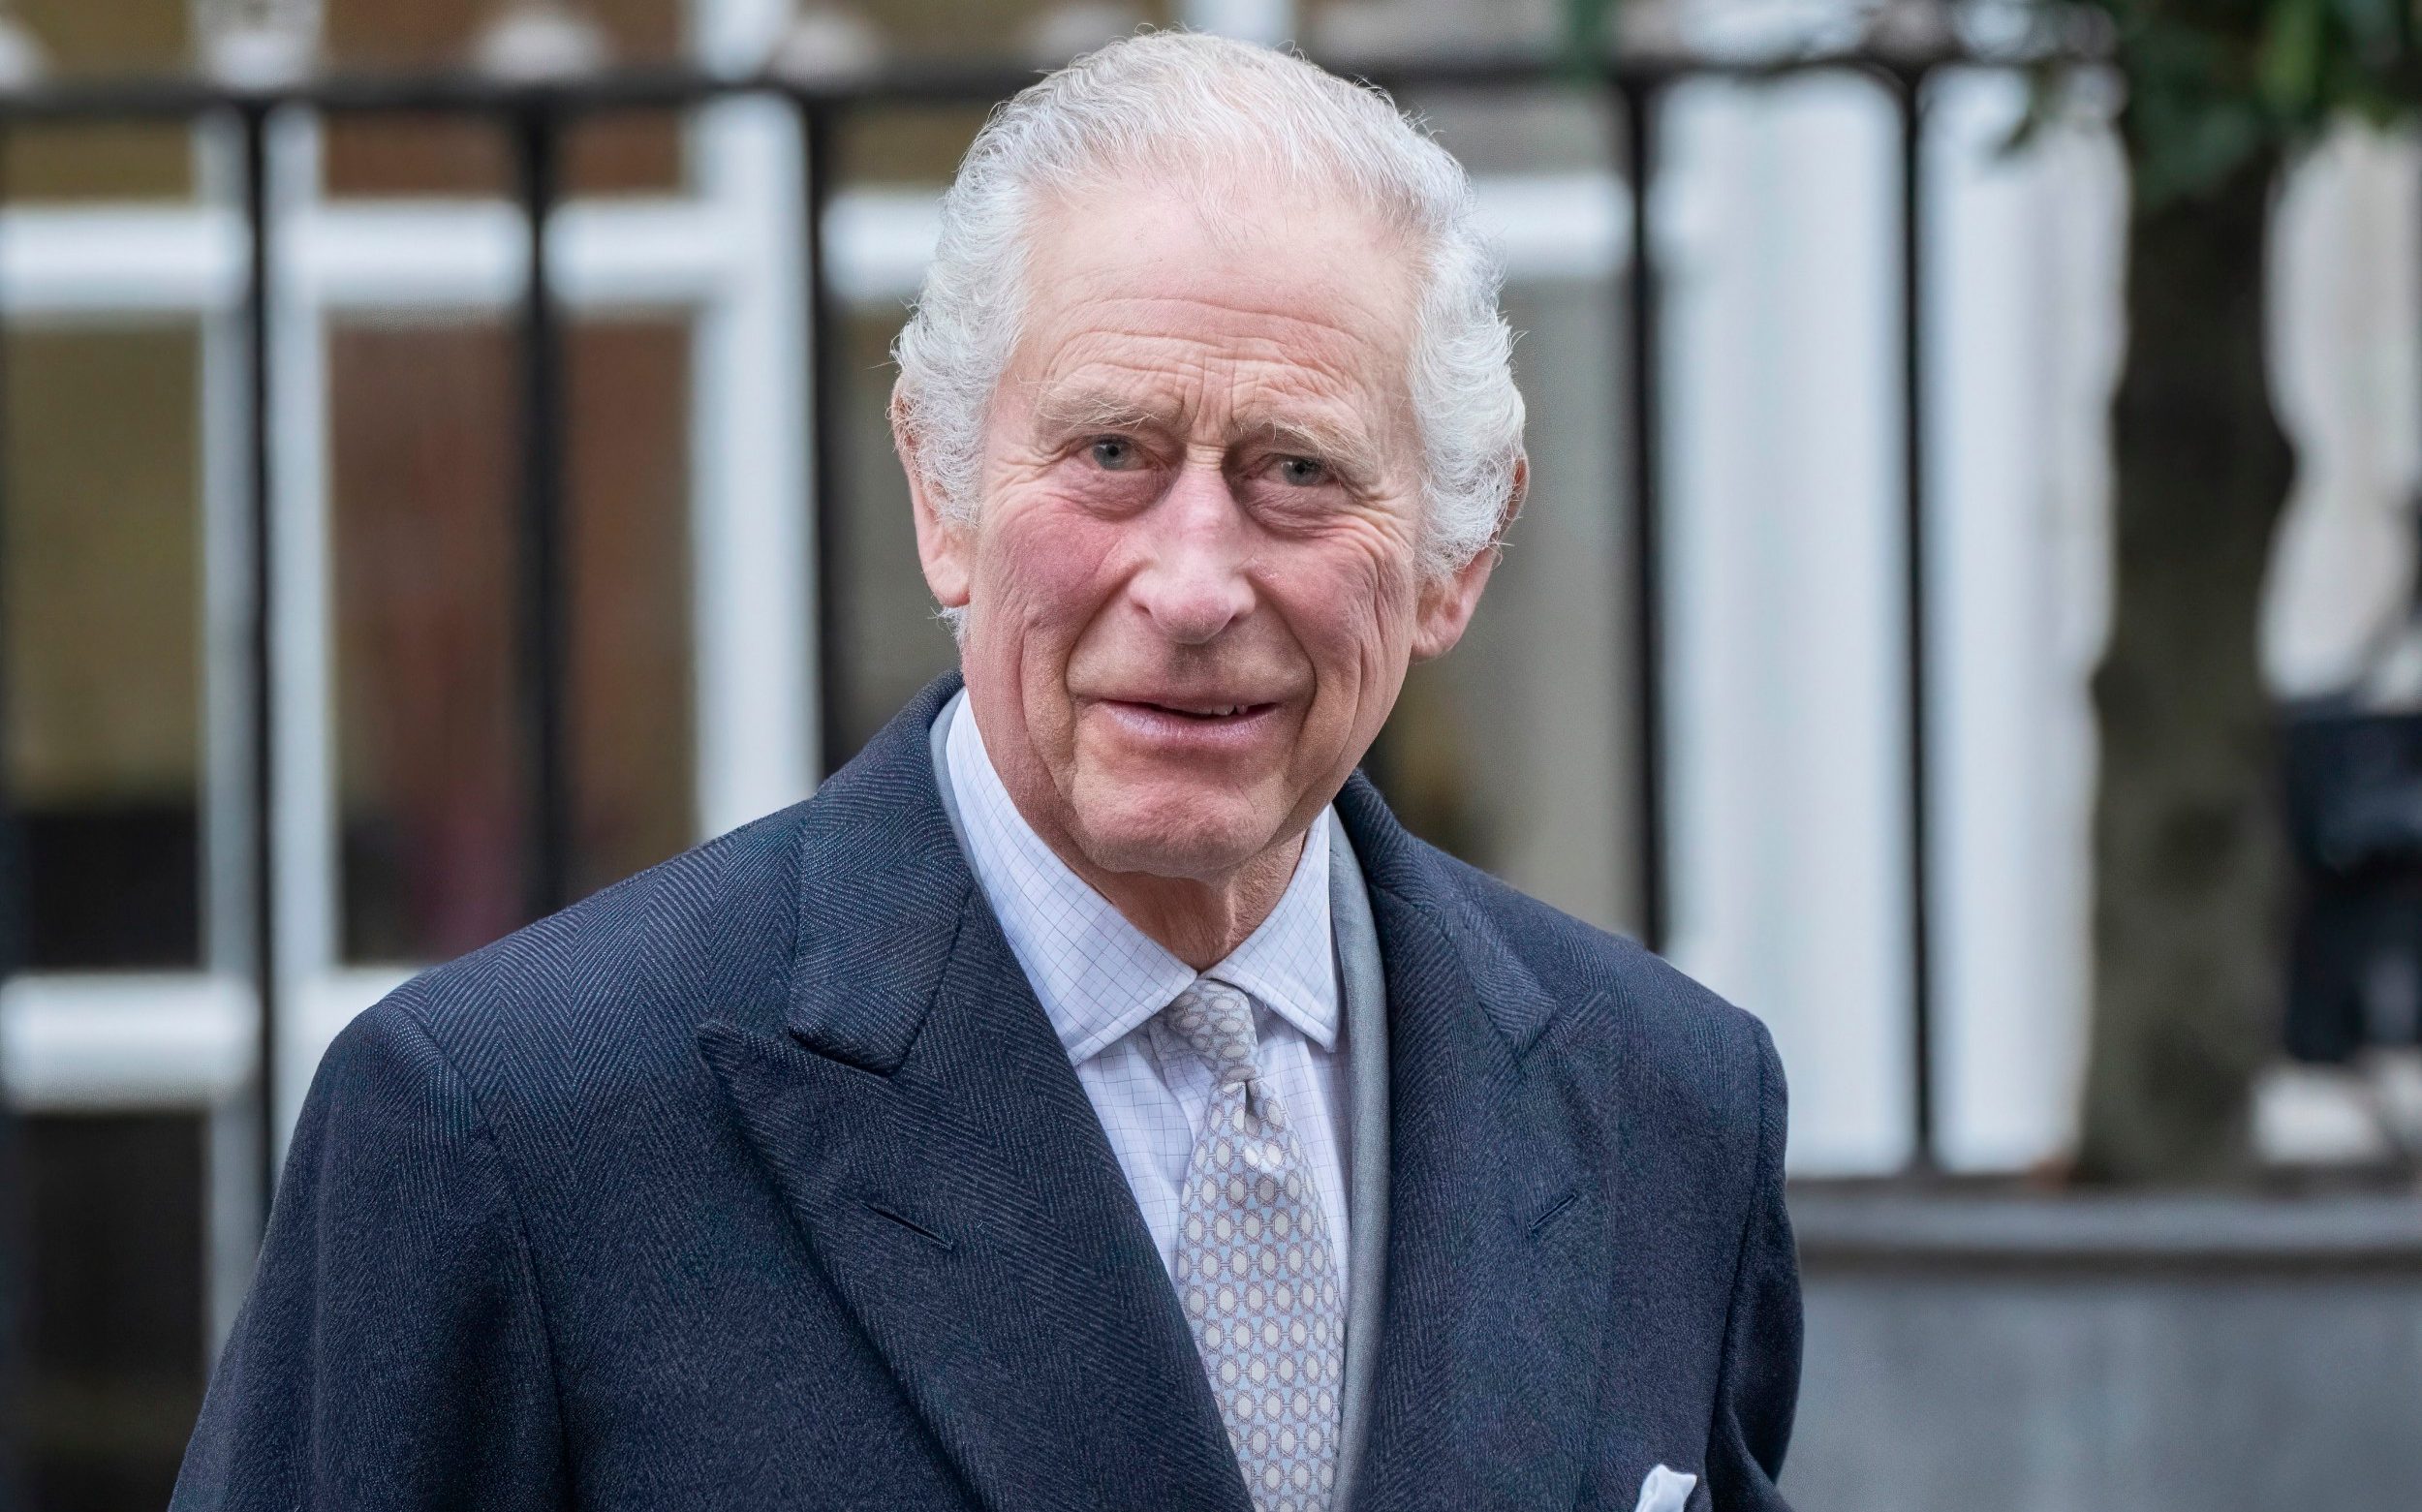 the king has adopted a distinctly gen-z habit – but i won’t fault him for it